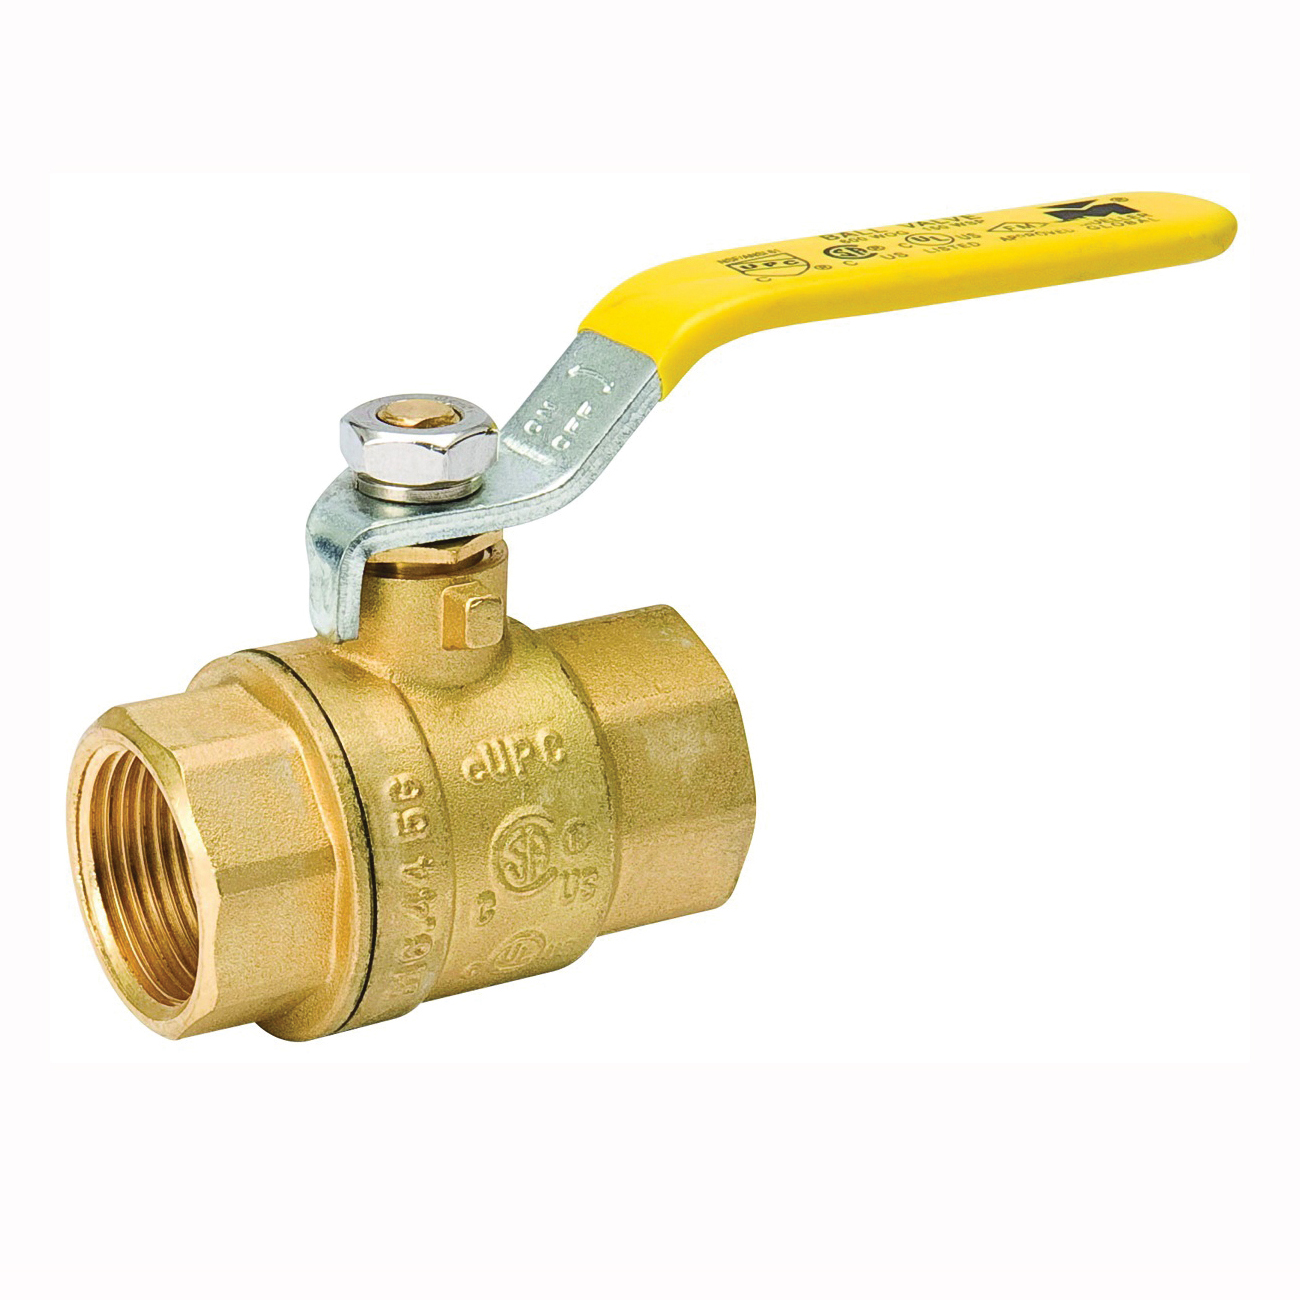 107-822NL Ball Valve, 3/8 in Connection, FPT x FPT, 600/150 psi Pressure, Manual Actuator, Brass Body